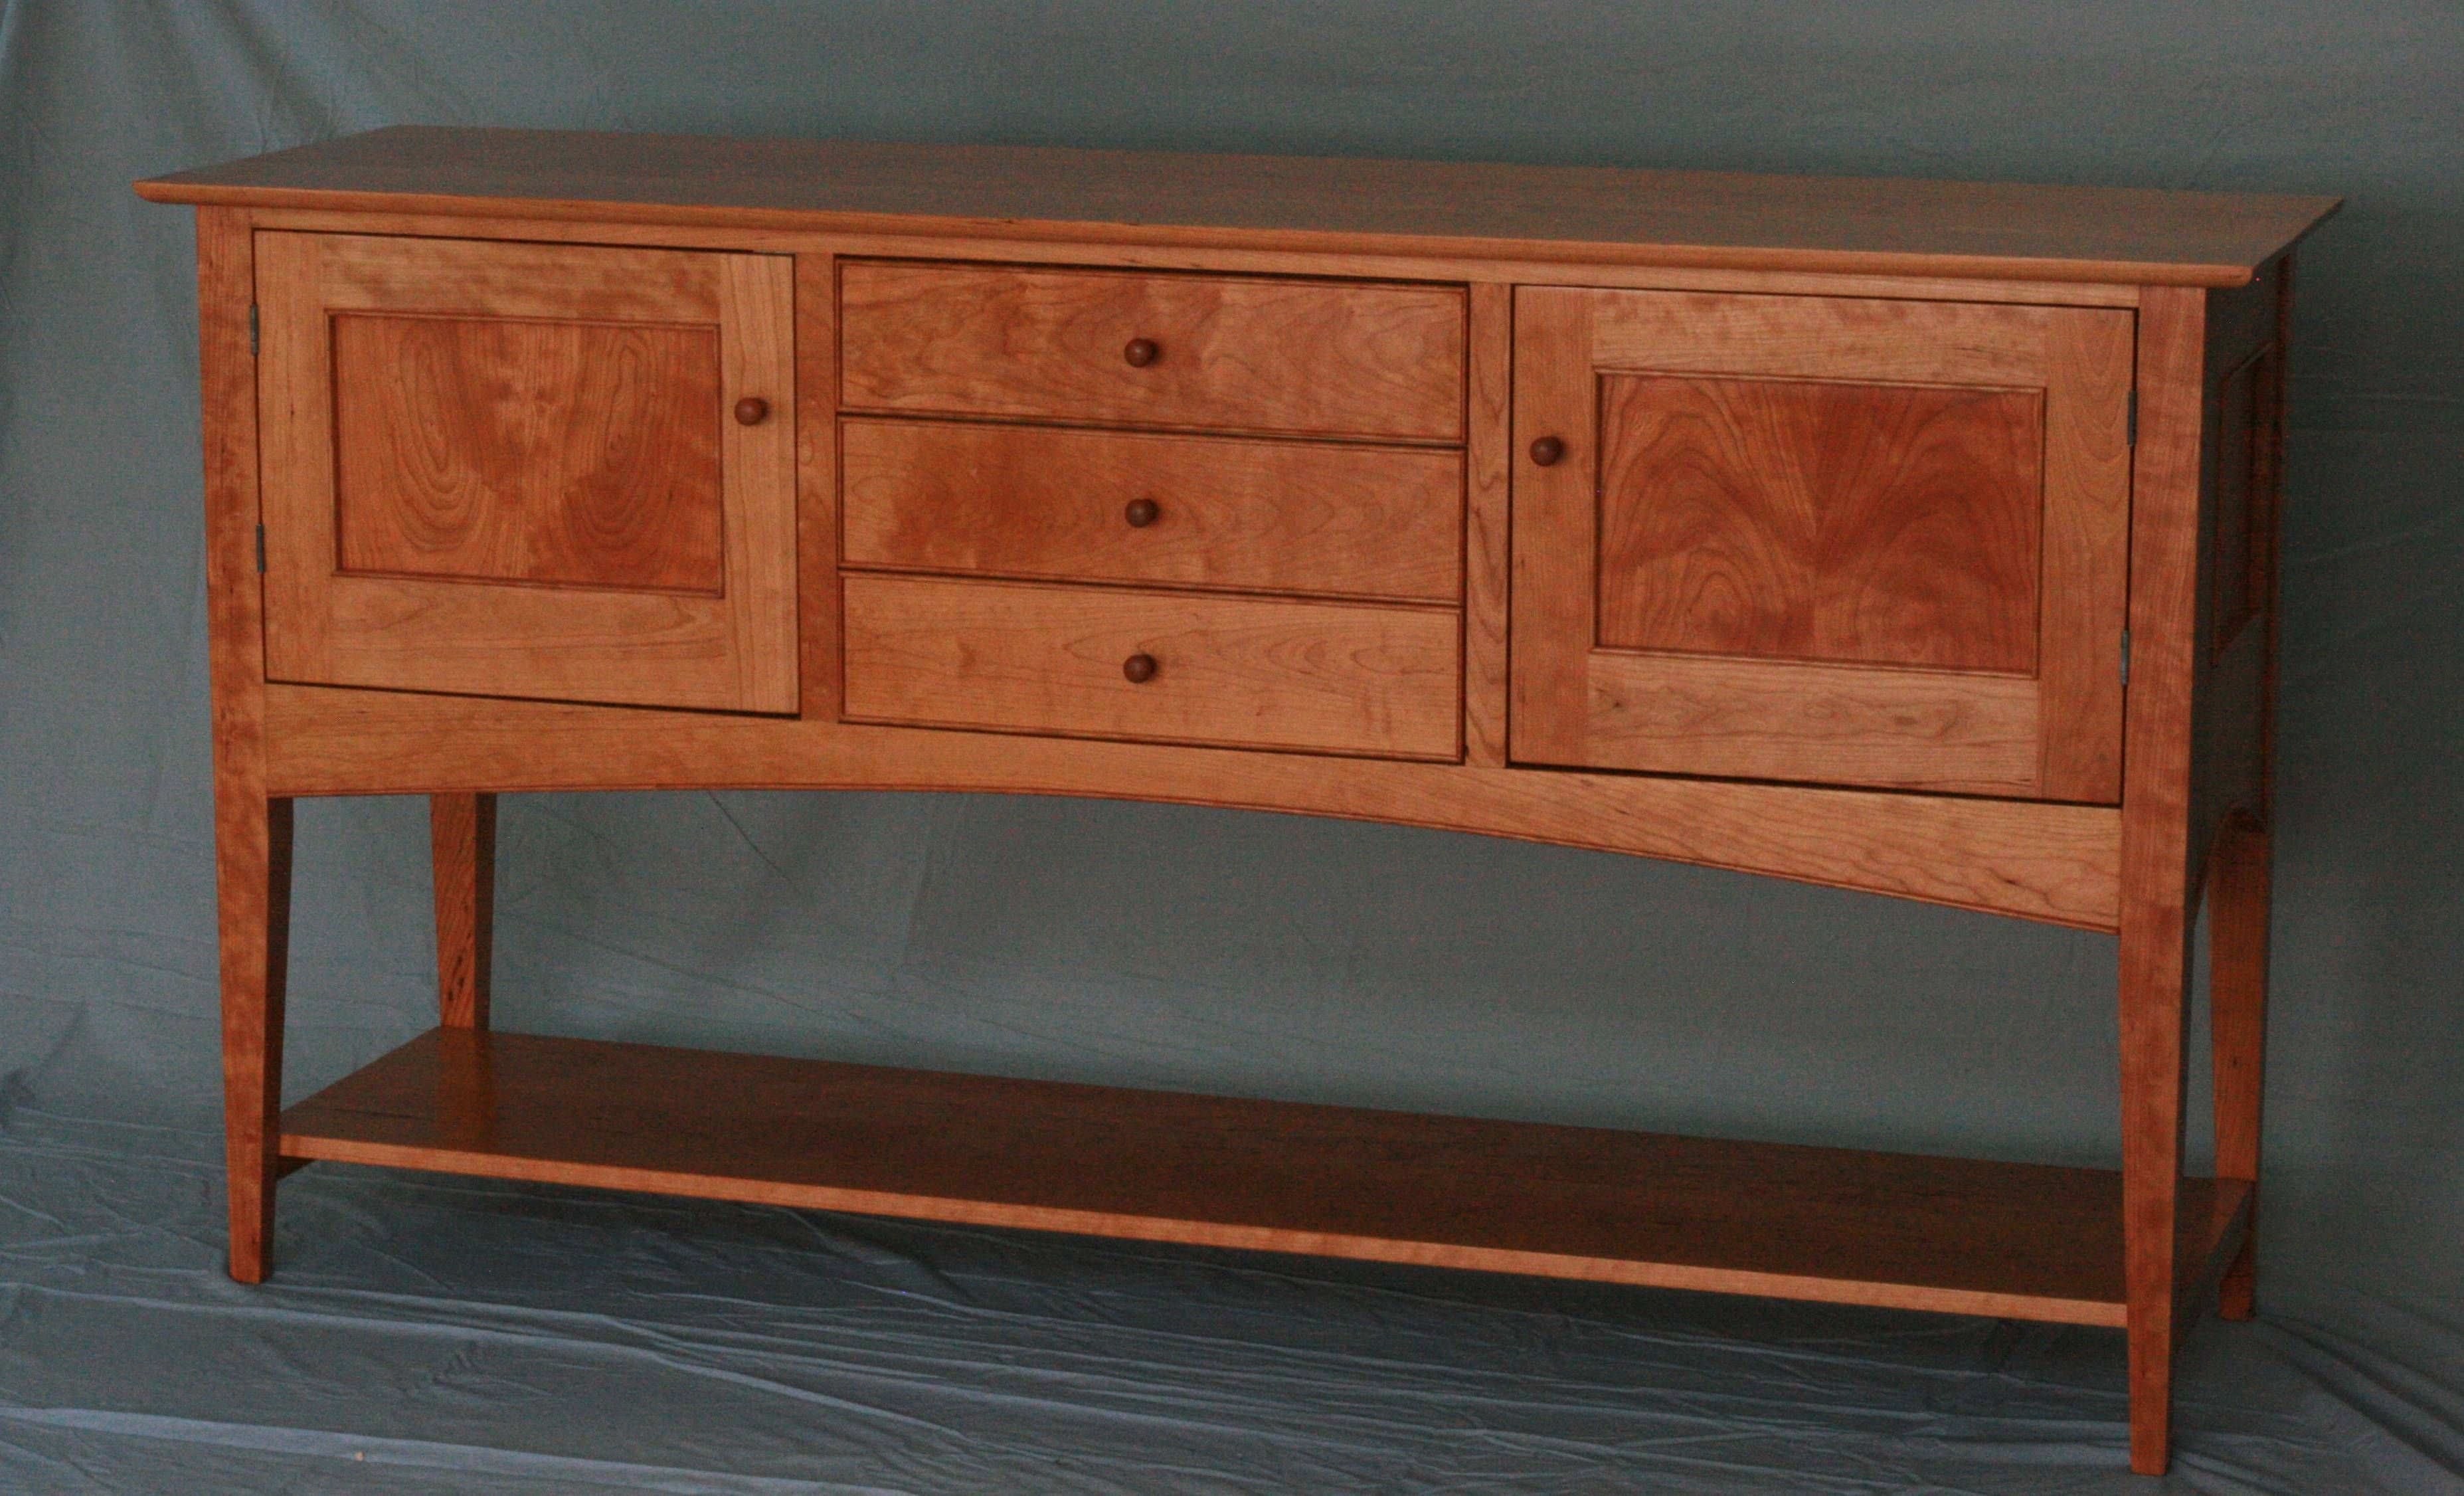 Furniture: Exciting Buffet Sideboard With Simple Amerock For Intended For Most Recent Sideboard Buffet Furniture (View 9 of 15)